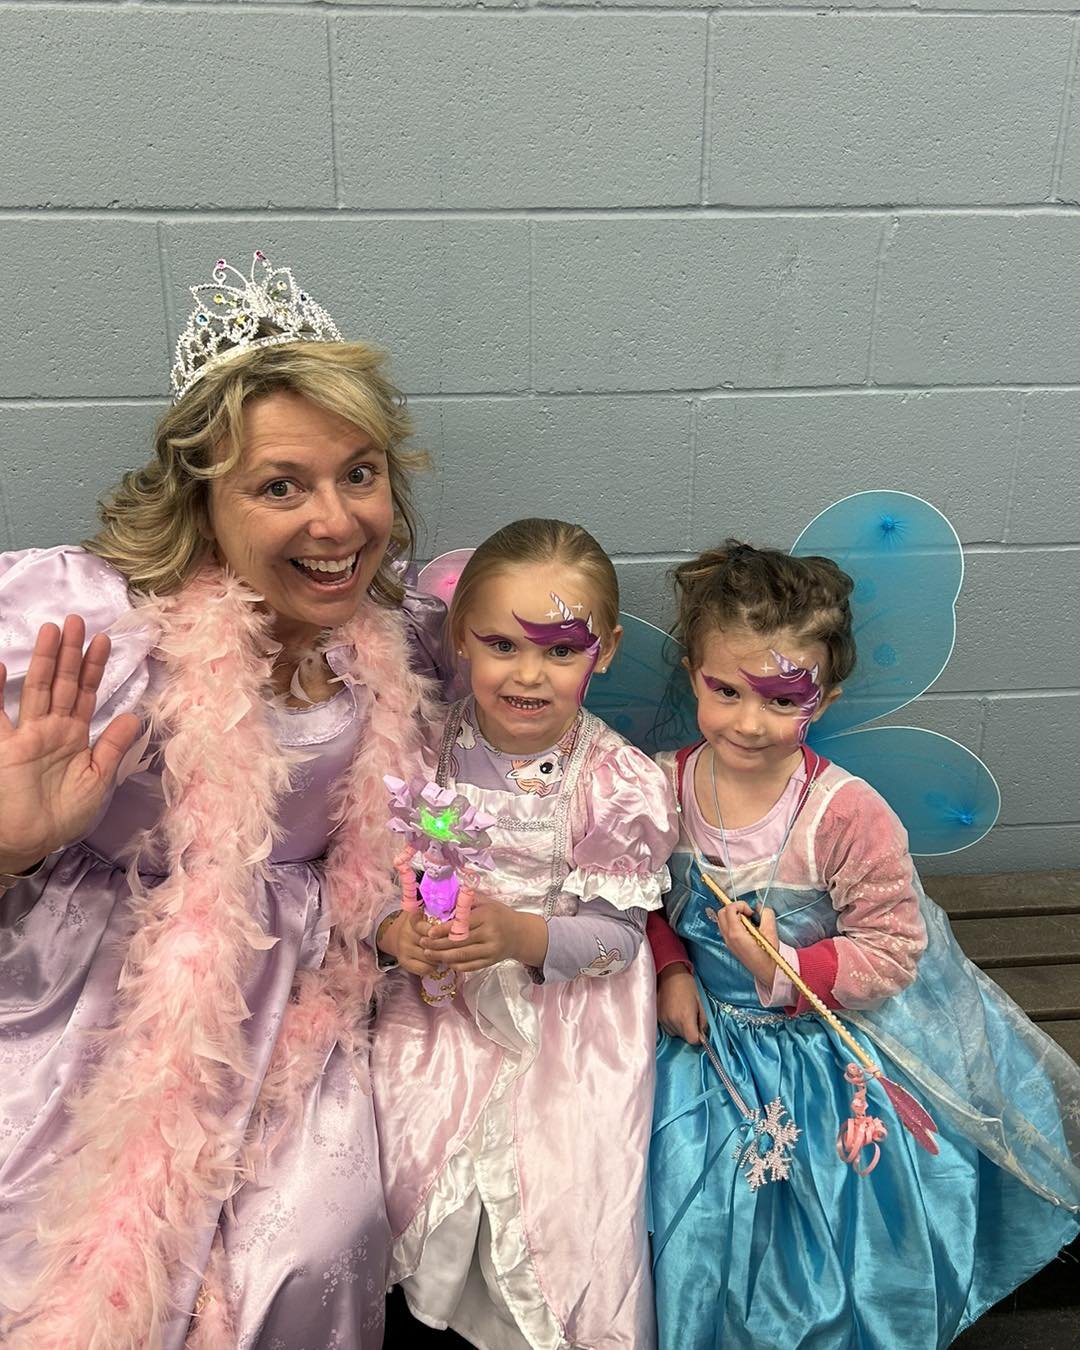 The show is hopping at the Fenelon Falls Community Centre! Princess Party until 1pm and face painting all weekend long thanks to Waite Real Estate! 💕✨